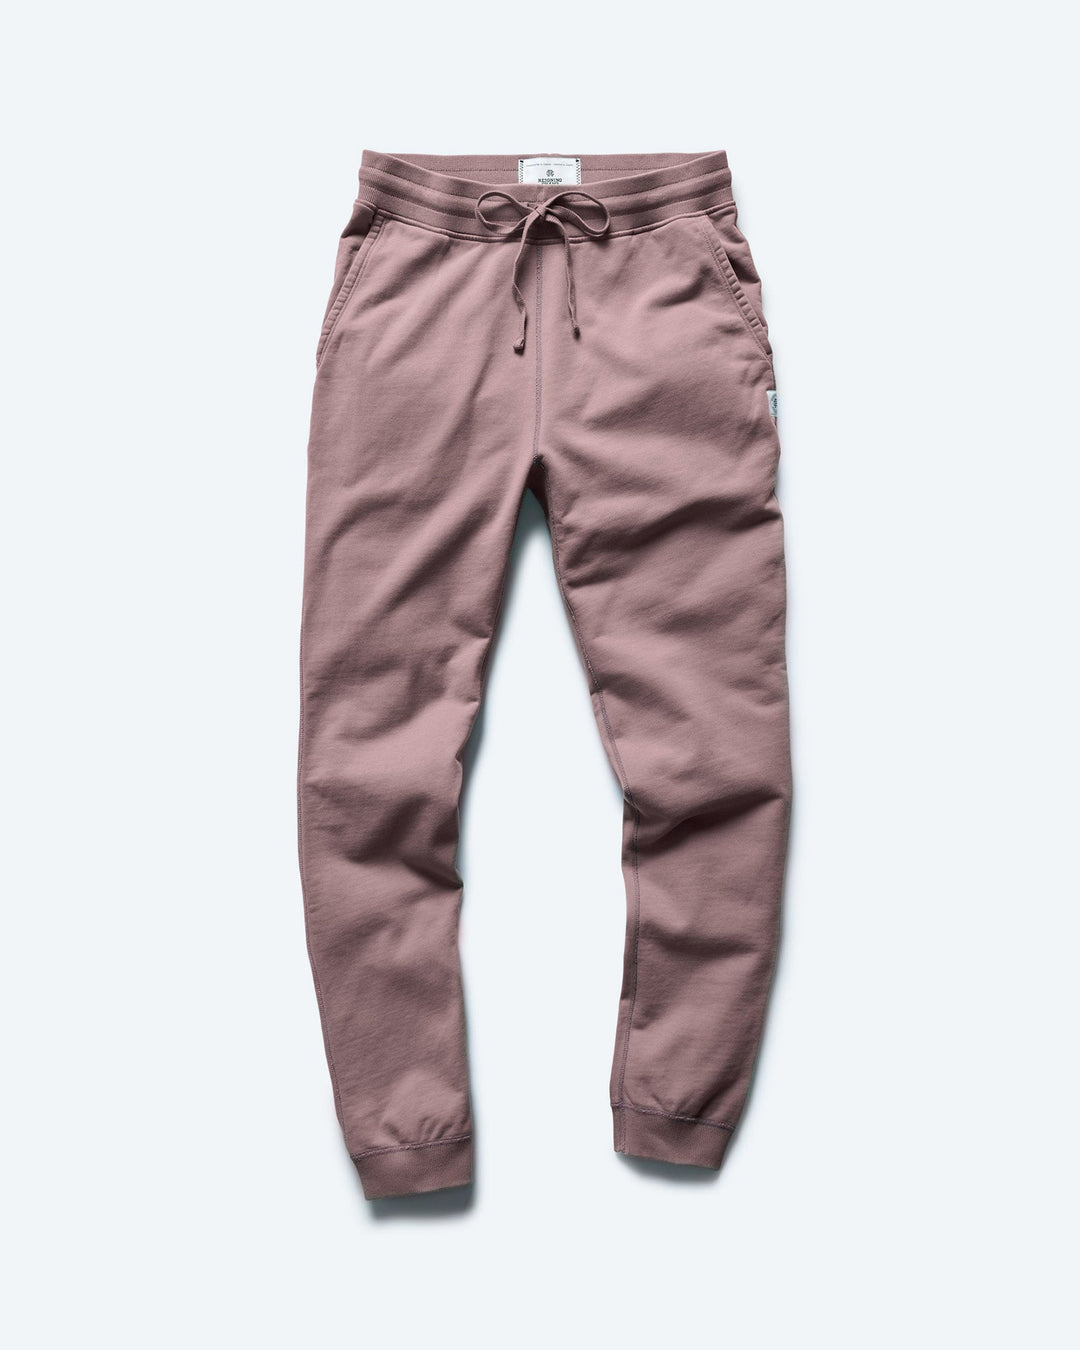 MIDWEIGHT SLIM FIT TERRY SWEAT PANT (ROSE) - REIGNING CHAMP